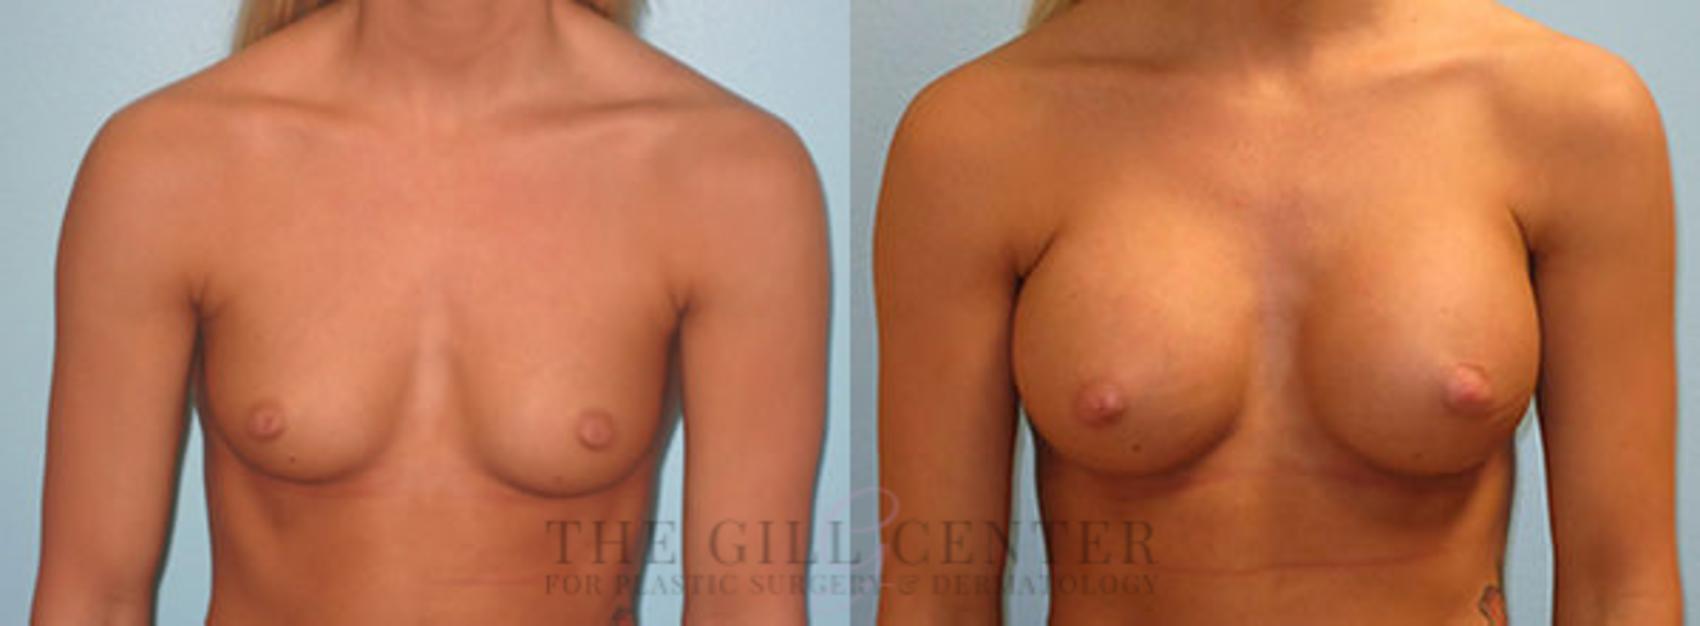 Breast Augmentation Case 40 Before & After Front | The Woodlands, TX | The Gill Center for Plastic Surgery and Dermatology